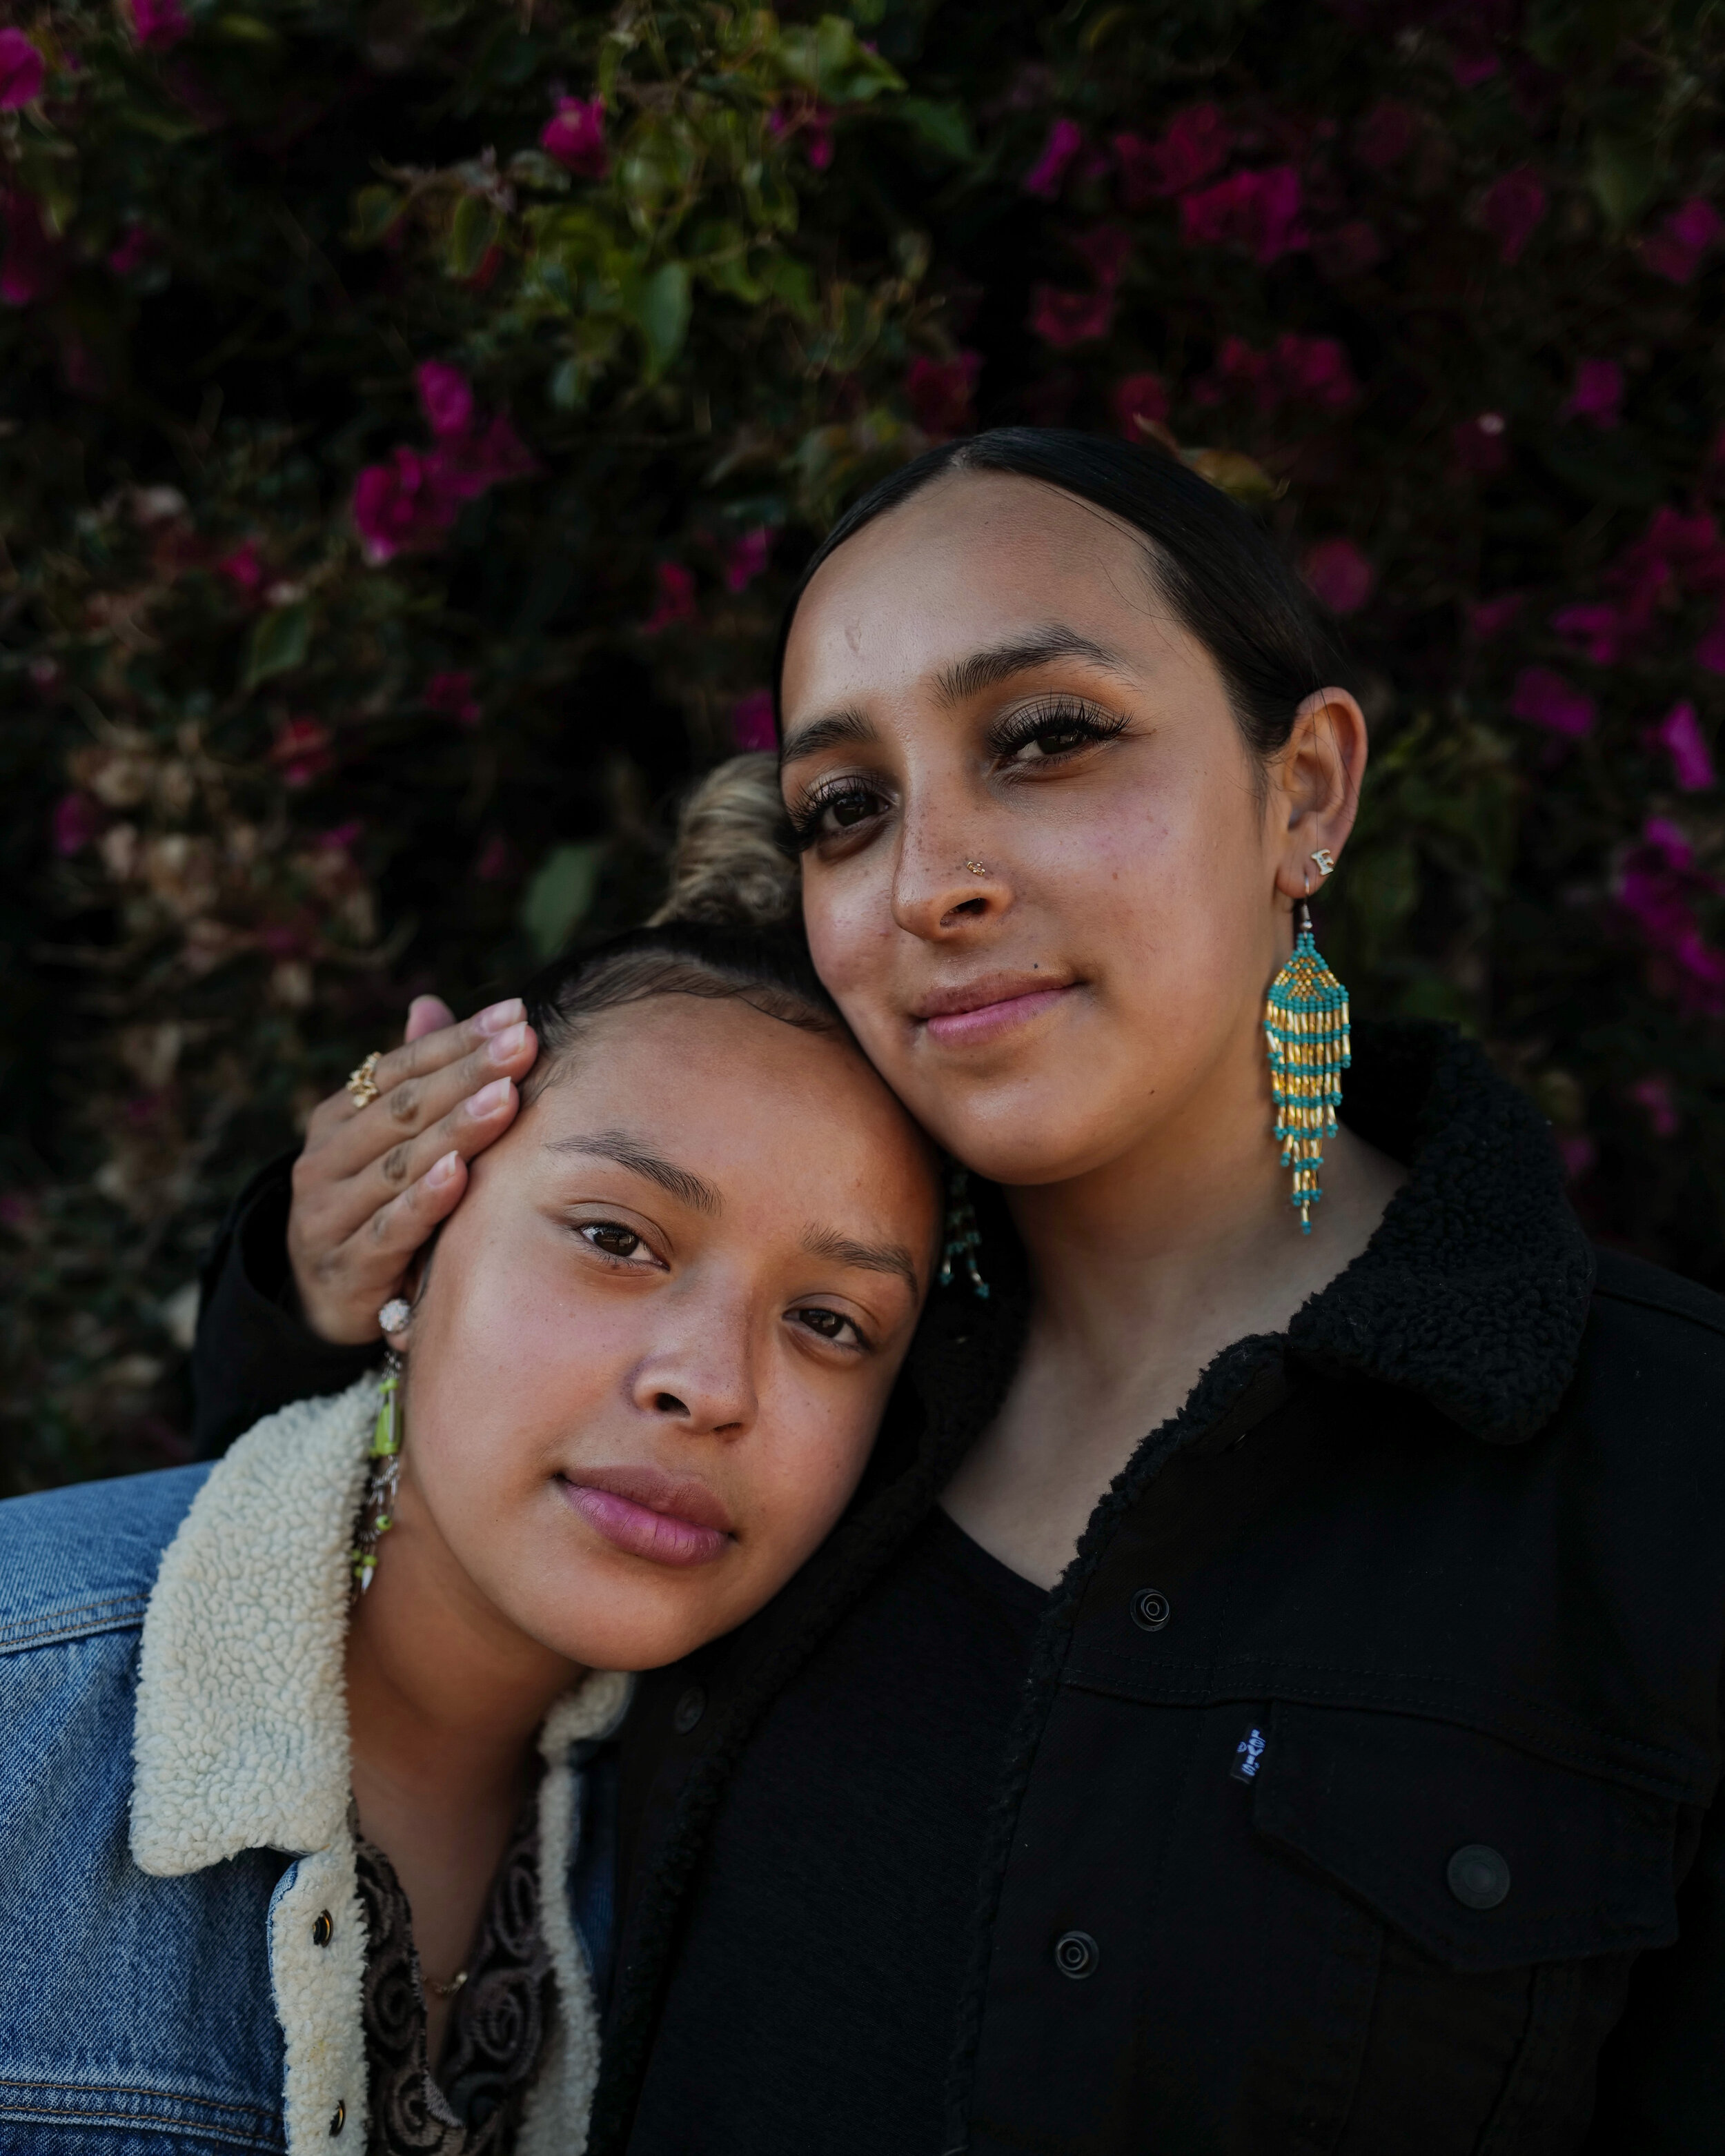  Michelle and Ashley Monterrosa. Their brother Sean Monterrosa was murdered by Vallejo police on June 2, 2020. Sean Monterrosa, 22, was unarmed—on his knees, his hands on his head—when he was fired on five times by officer Jarrett Tonn through the wi